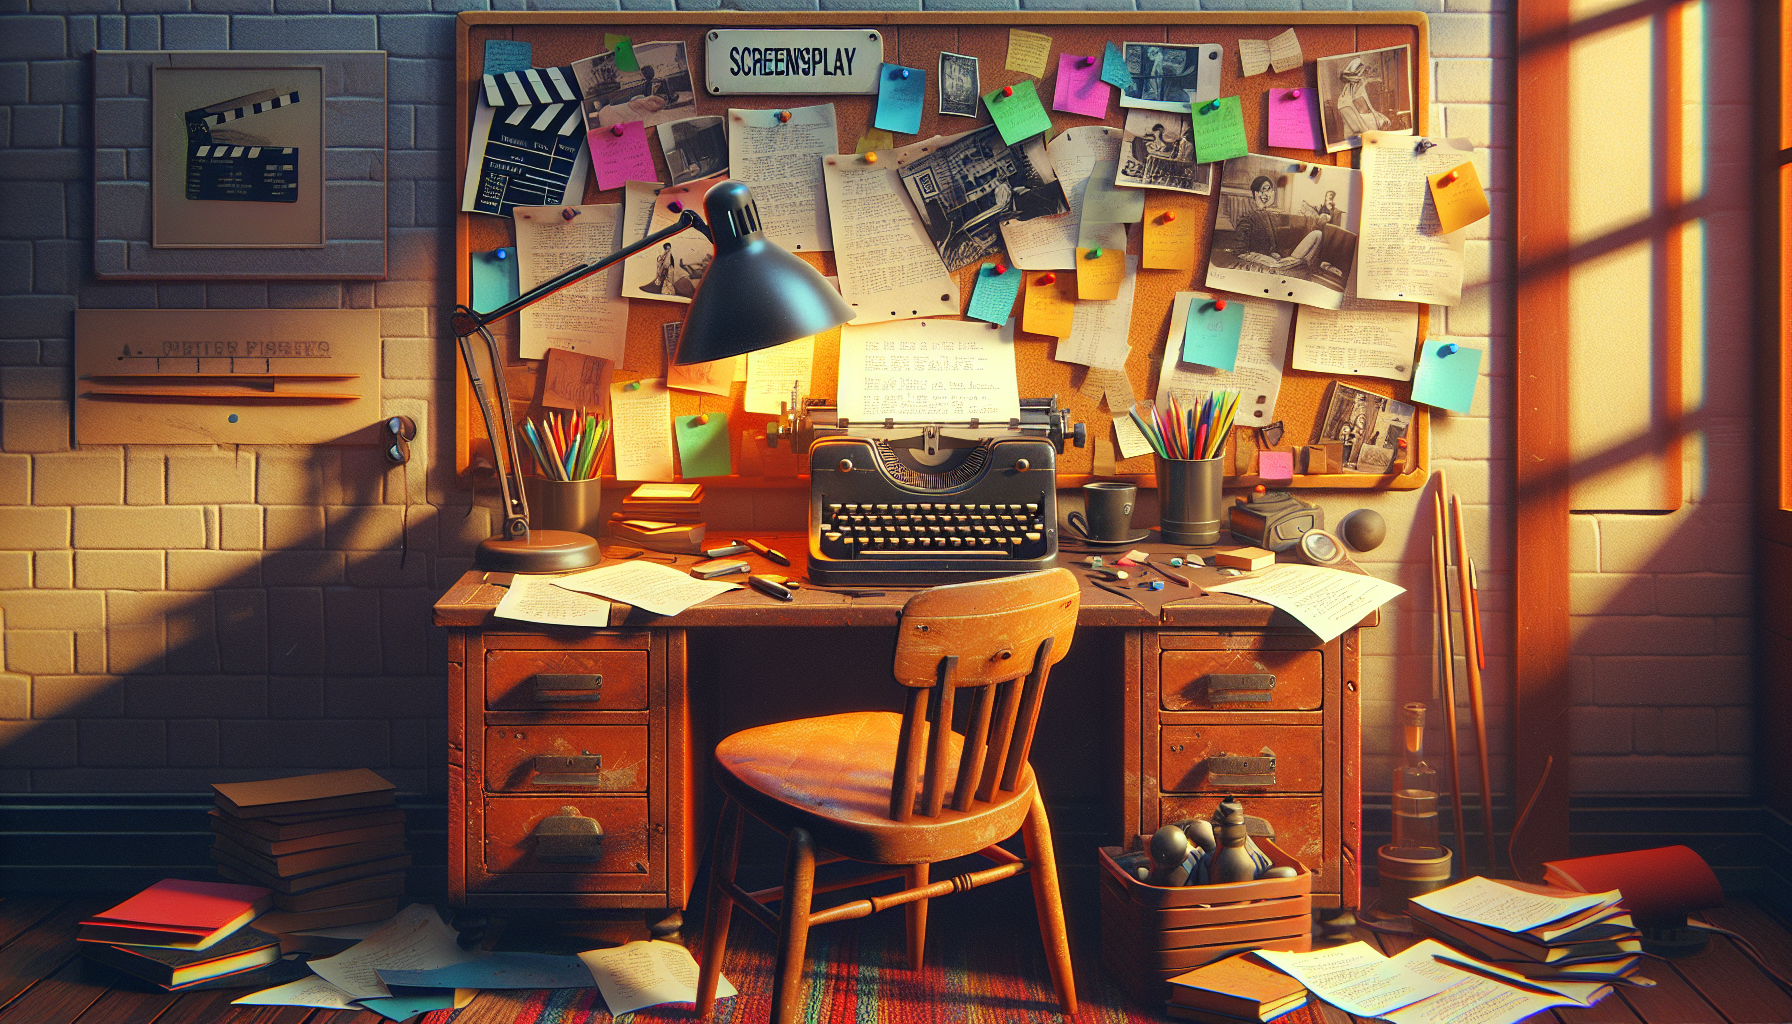 A vintage typewriter on a wooden desk, surrounded by scattered screenplay pages, a glowing desk lamp, and a corkboard filled with colorful notes and pictures, in a cozy, dimly-lit writer's room.